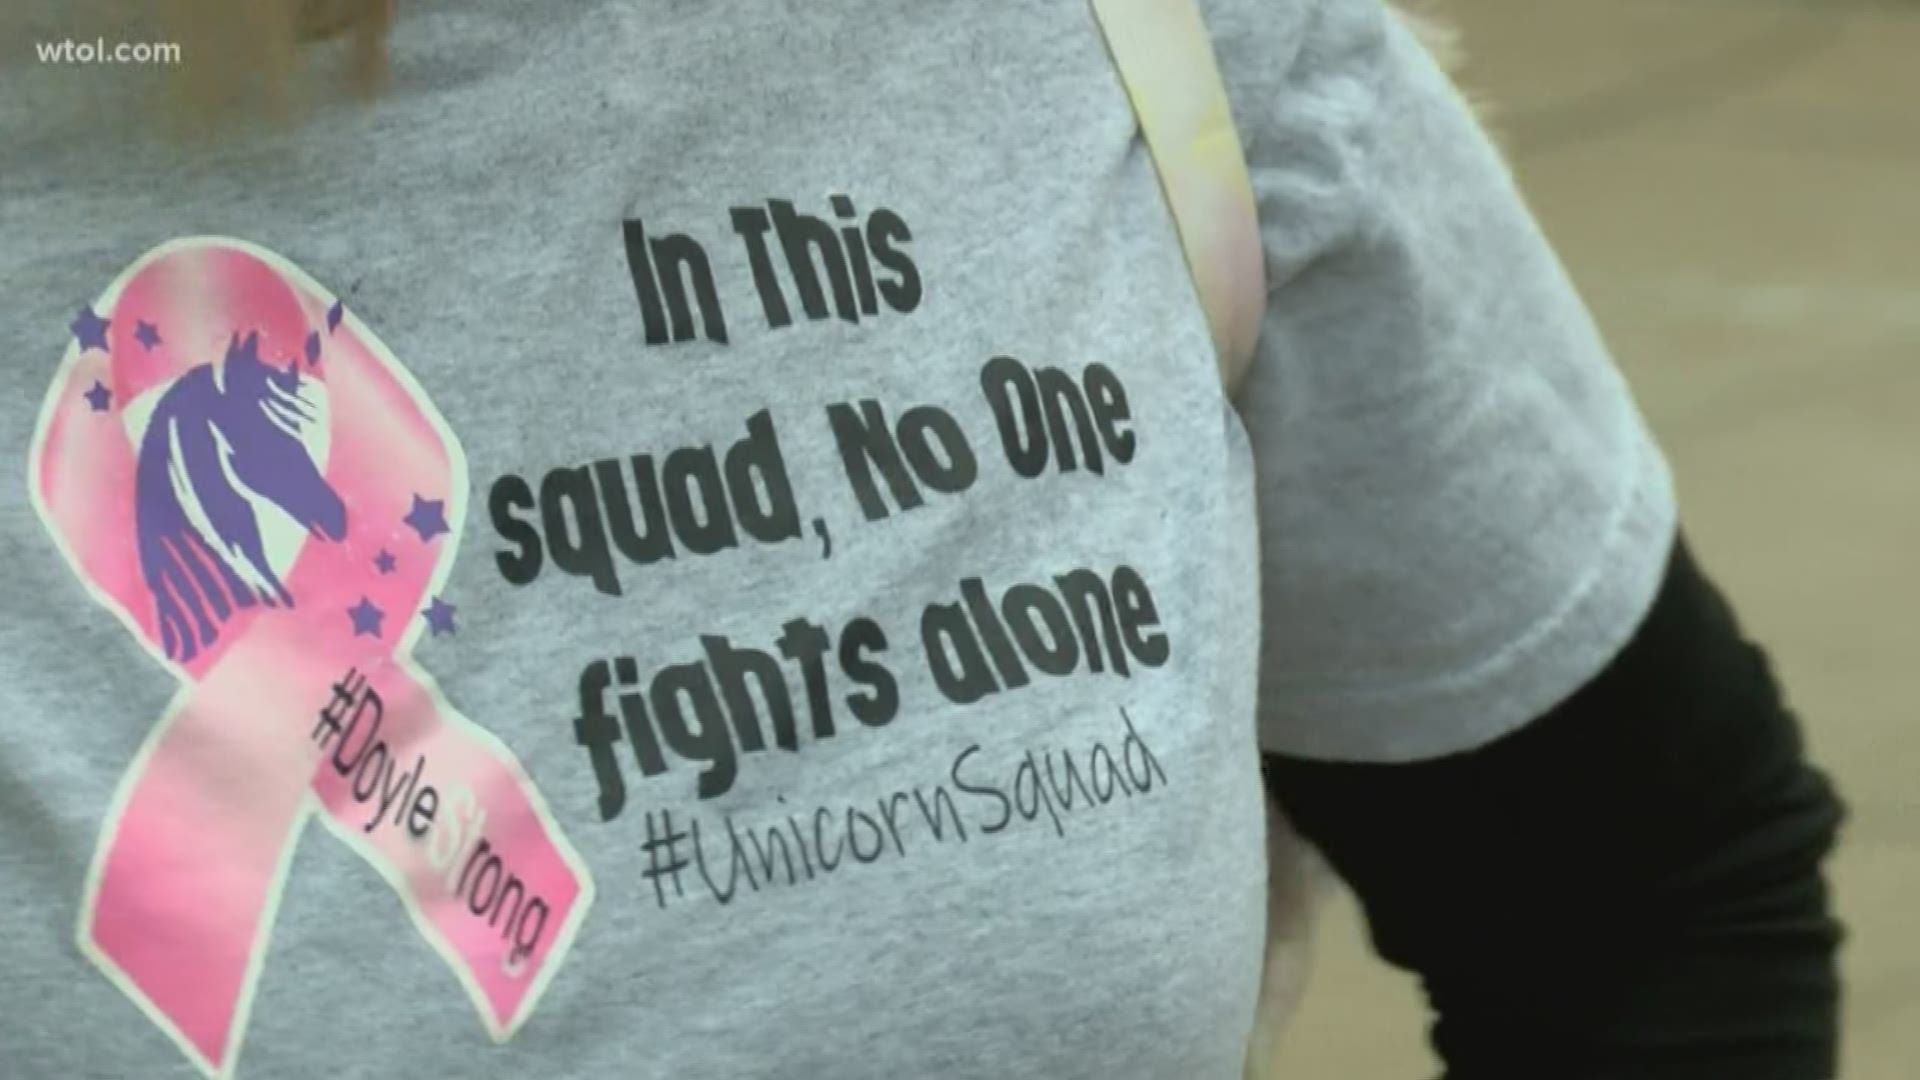 WTOL's Melissa Andrews had a team for the event, which included cancer patient Stephanie Doyal and her mother, Janet Malinowski.